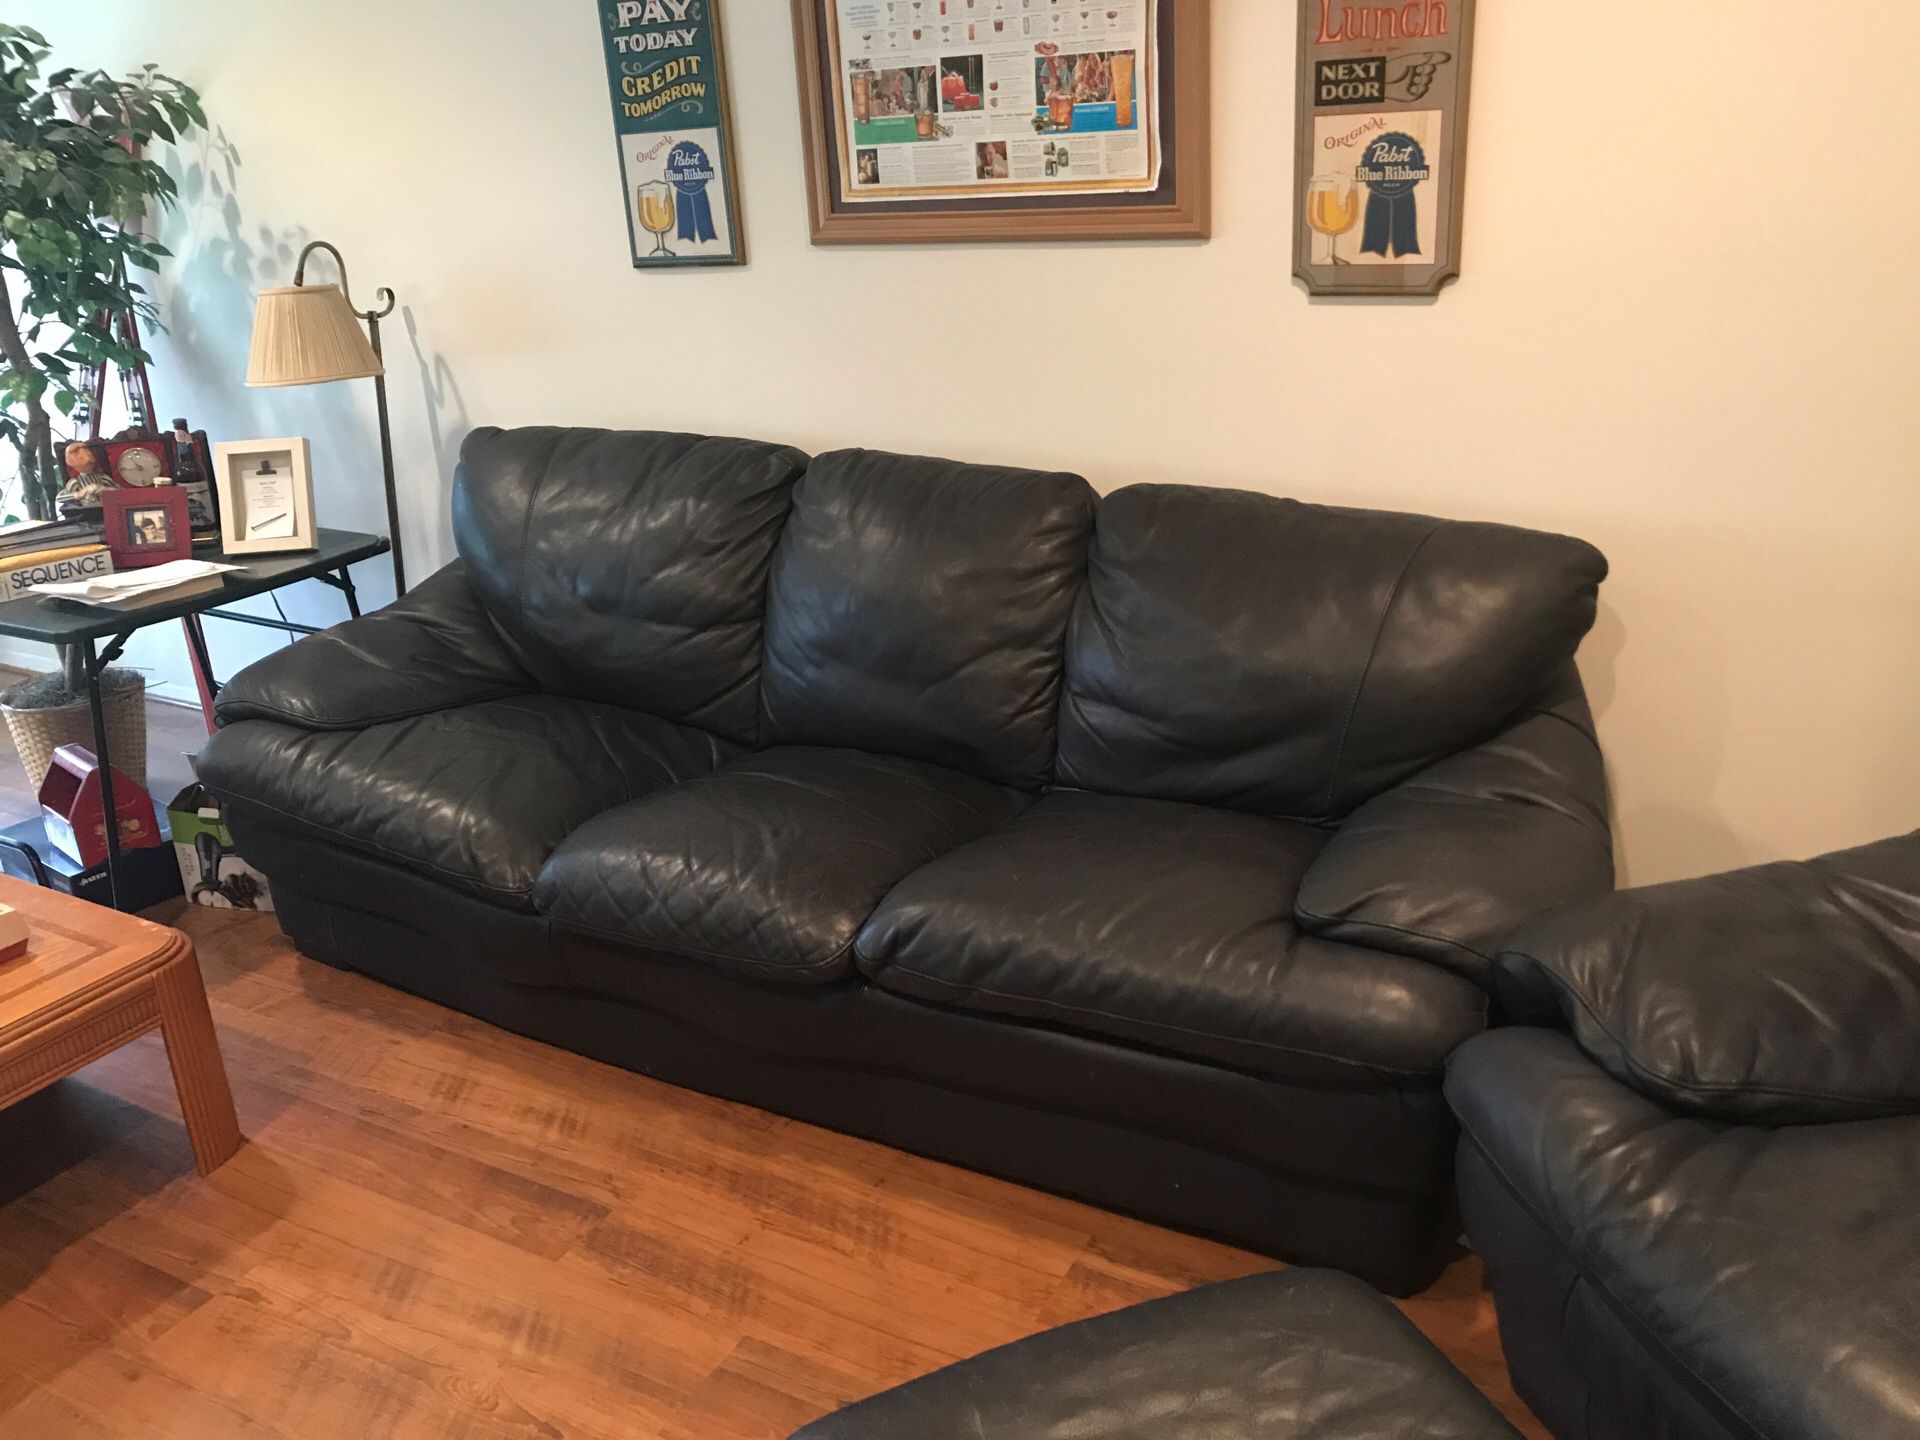 Leather Couch and Chair Combo $200 Cash or Check Only Price Negotiable. Need to Sell by end of May!